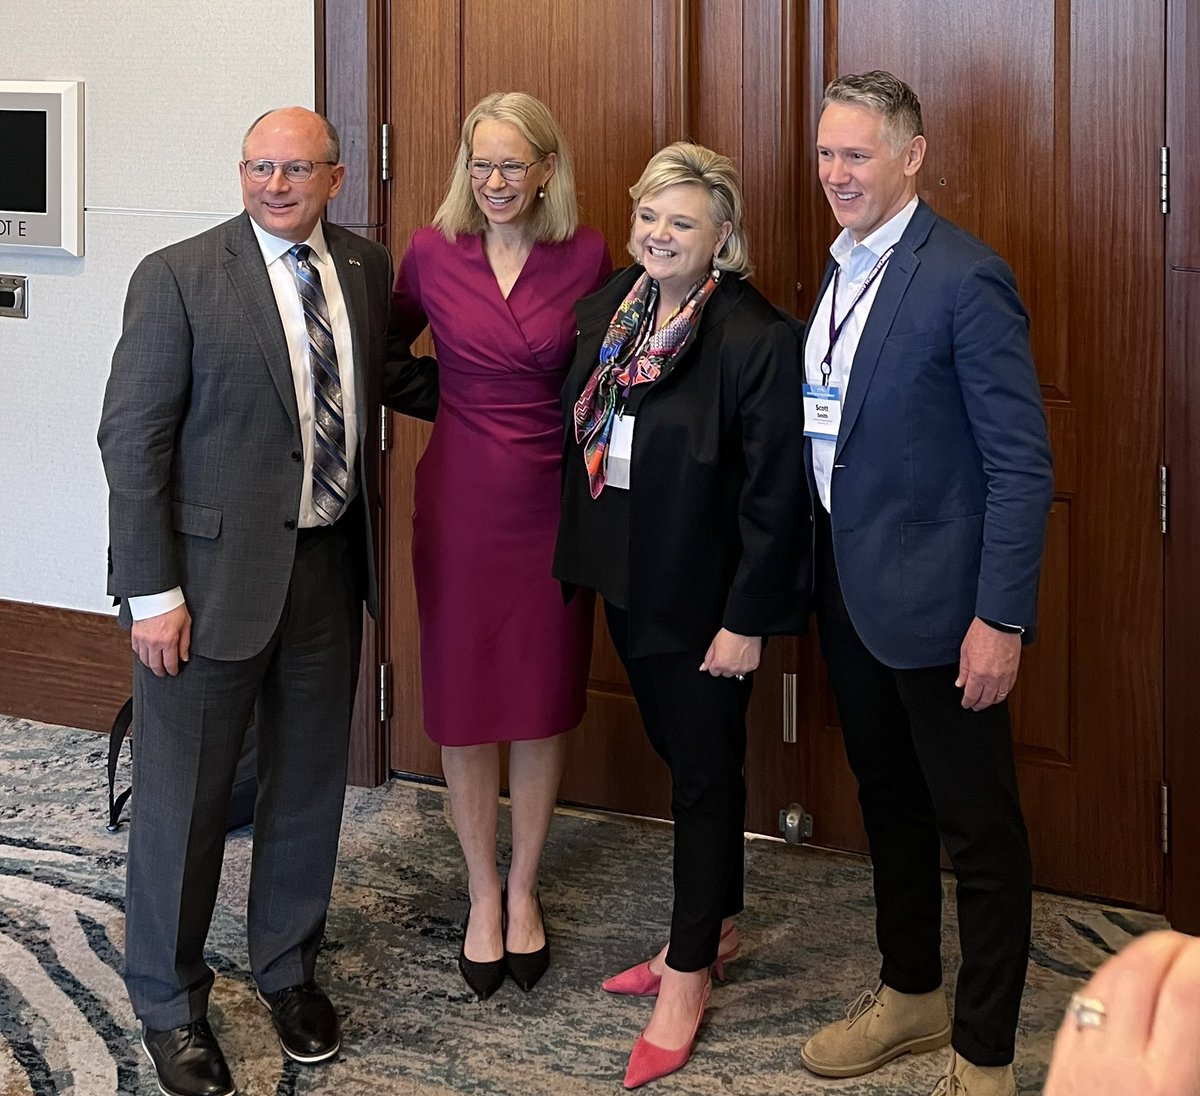 Honored to join fellow legislators on a panel at the @AmerMedicalAssn State Advocacy Summit. Great conversations on how we advocate for better healthcare options for patients. @timreedernc @Morrison4MN